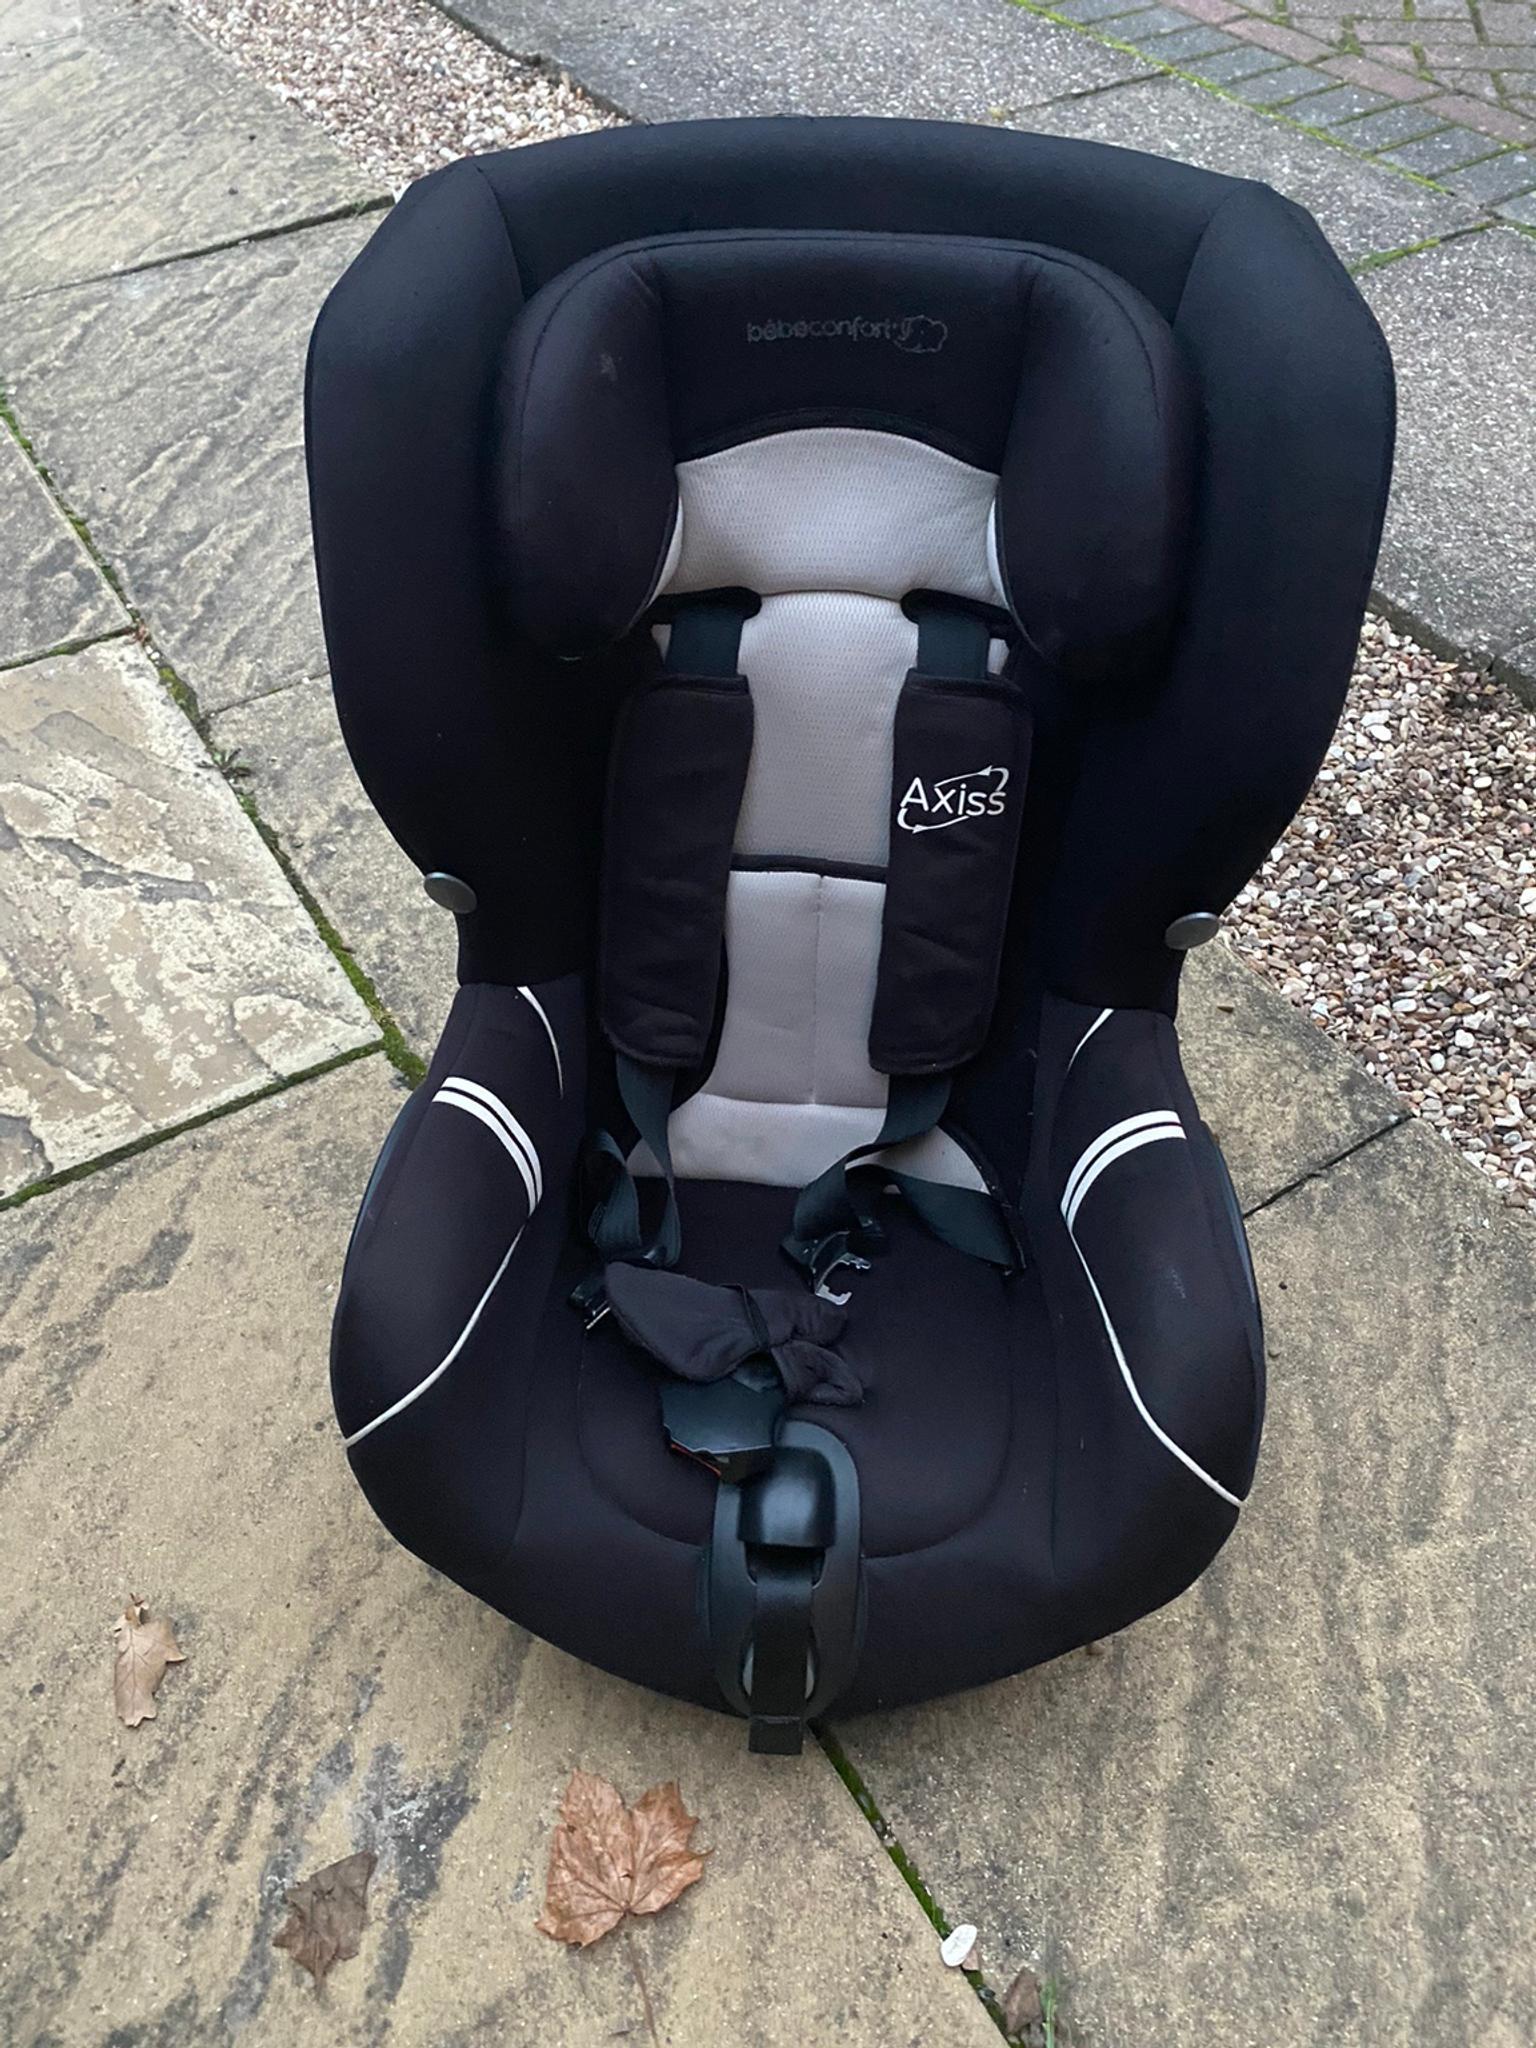 Axiss swivel car seat in B32 Birmingham for £35.00 for sale Shpock